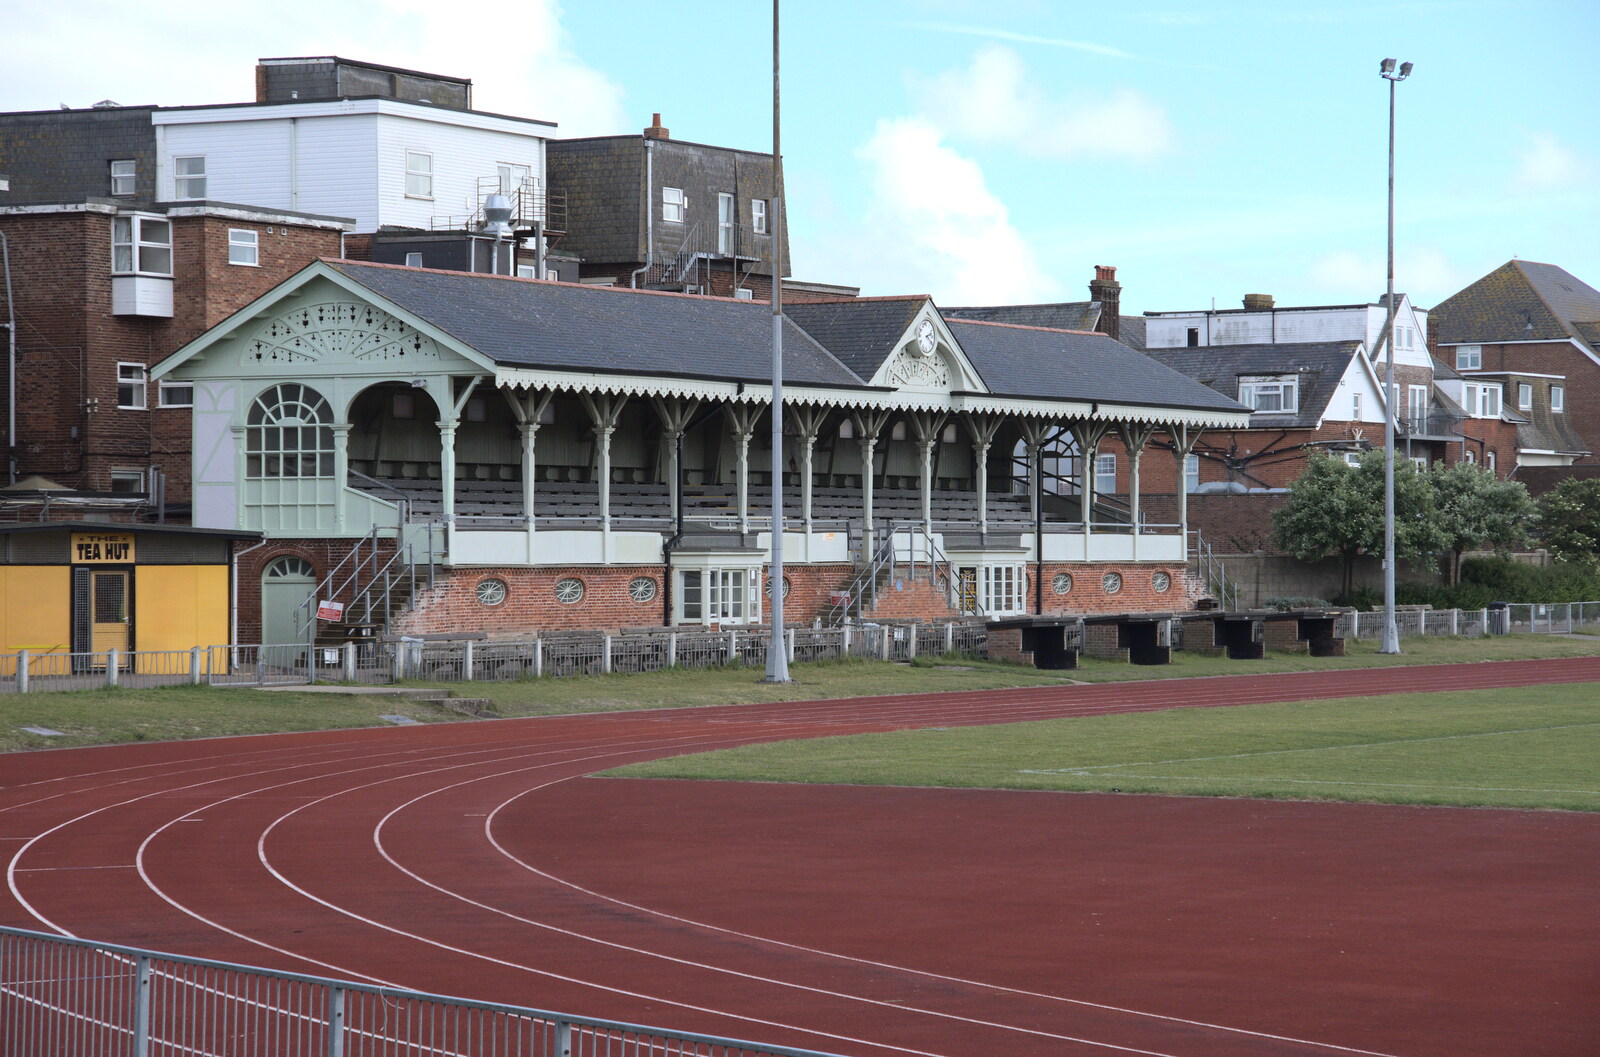 The atheletics track just behind our hotel from Faded Seaside Glamour: A Weekend in Great Yarmouth, Norfolk - 29th May 2022